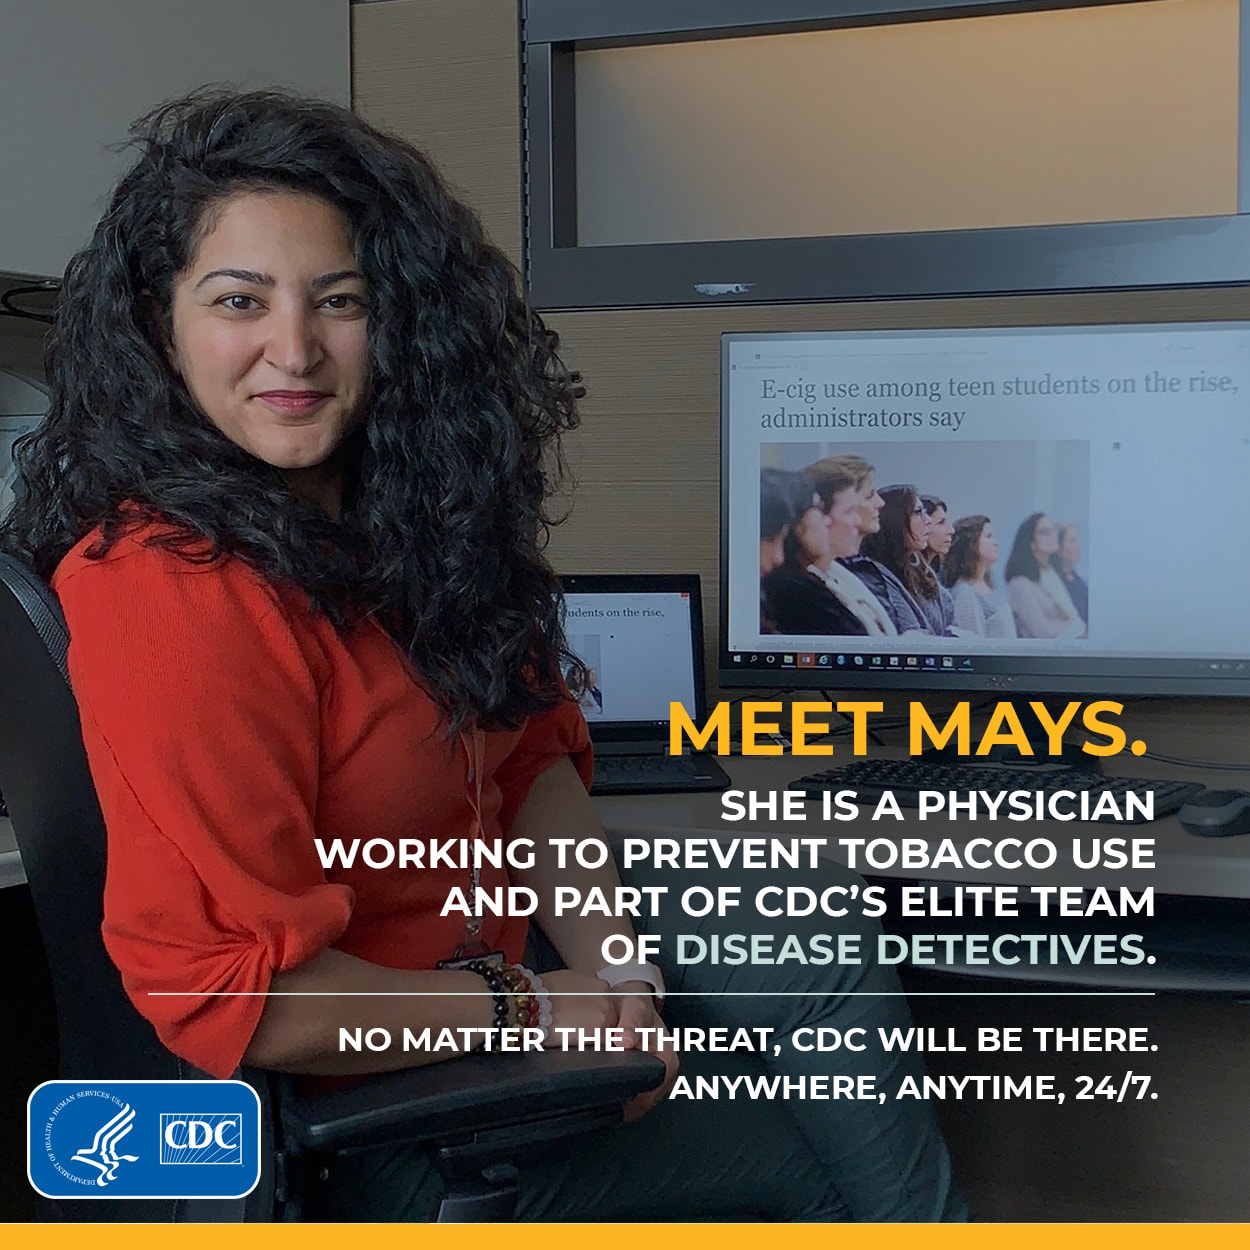 Meet Mays.  She is a physician working to prevent tobacco use and part of CDC's elite team of disease detectives.